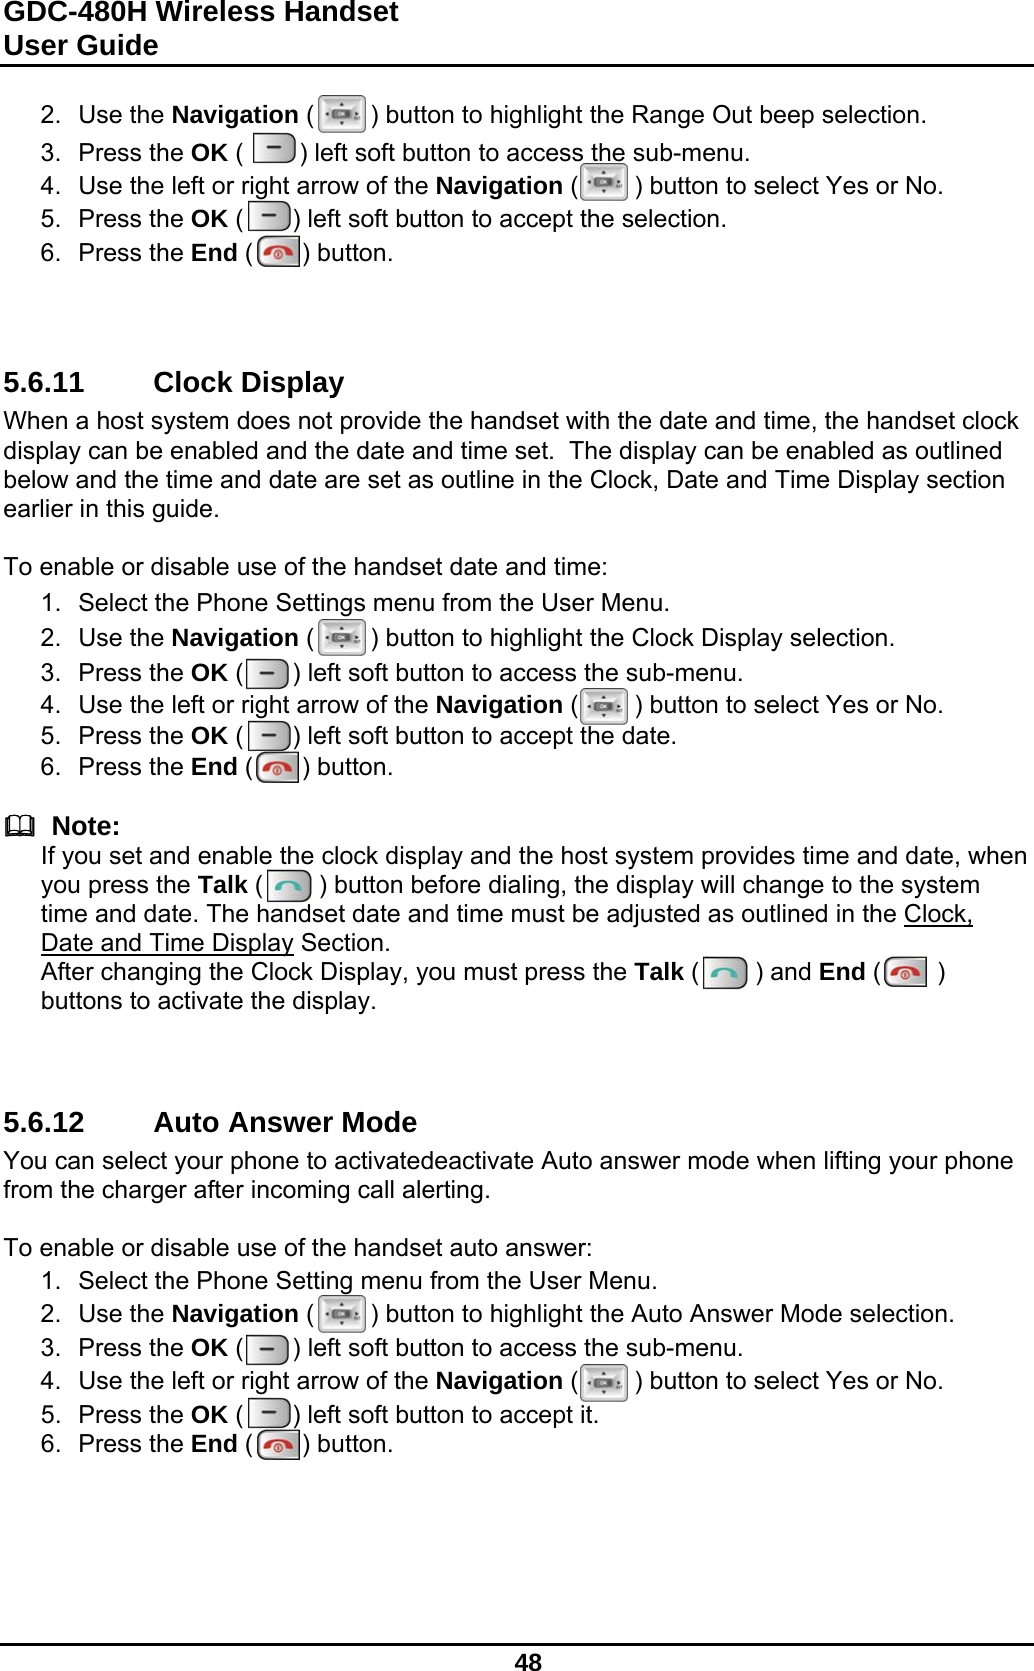 GDC-480H Wireless Handset User Guide   48  2. Use the Navigation (        ) button to highlight the Range Out beep selection. 3. Press the OK (        ) left soft button to access the sub-menu. 4.  Use the left or right arrow of the Navigation (        ) button to select Yes or No. 5. Press the OK (       ) left soft button to accept the selection. 6. Press the End (       ) button.    5.6.11 Clock Display When a host system does not provide the handset with the date and time, the handset clock display can be enabled and the date and time set.  The display can be enabled as outlined below and the time and date are set as outline in the Clock, Date and Time Display section earlier in this guide.  To enable or disable use of the handset date and time: 1.  Select the Phone Settings menu from the User Menu. 2. Use the Navigation (        ) button to highlight the Clock Display selection. 3. Press the OK (       ) left soft button to access the sub-menu. 4.  Use the left or right arrow of the Navigation (        ) button to select Yes or No. 5. Press the OK (       ) left soft button to accept the date. 6. Press the End (       ) button.    Note: If you set and enable the clock display and the host system provides time and date, when you press the Talk (        ) button before dialing, the display will change to the system time and date. The handset date and time must be adjusted as outlined in the Clock, Date and Time Display Section. After changing the Clock Display, you must press the Talk (        ) and End (        ) buttons to activate the display.    5.6.12 Auto Answer Mode You can select your phone to activatedeactivate Auto answer mode when lifting your phone from the charger after incoming call alerting.   To enable or disable use of the handset auto answer: 1.  Select the Phone Setting menu from the User Menu. 2. Use the Navigation (        ) button to highlight the Auto Answer Mode selection. 3. Press the OK (       ) left soft button to access the sub-menu. 4.  Use the left or right arrow of the Navigation (        ) button to select Yes or No. 5. Press the OK (       ) left soft button to accept it. 6. Press the End (       ) button.    